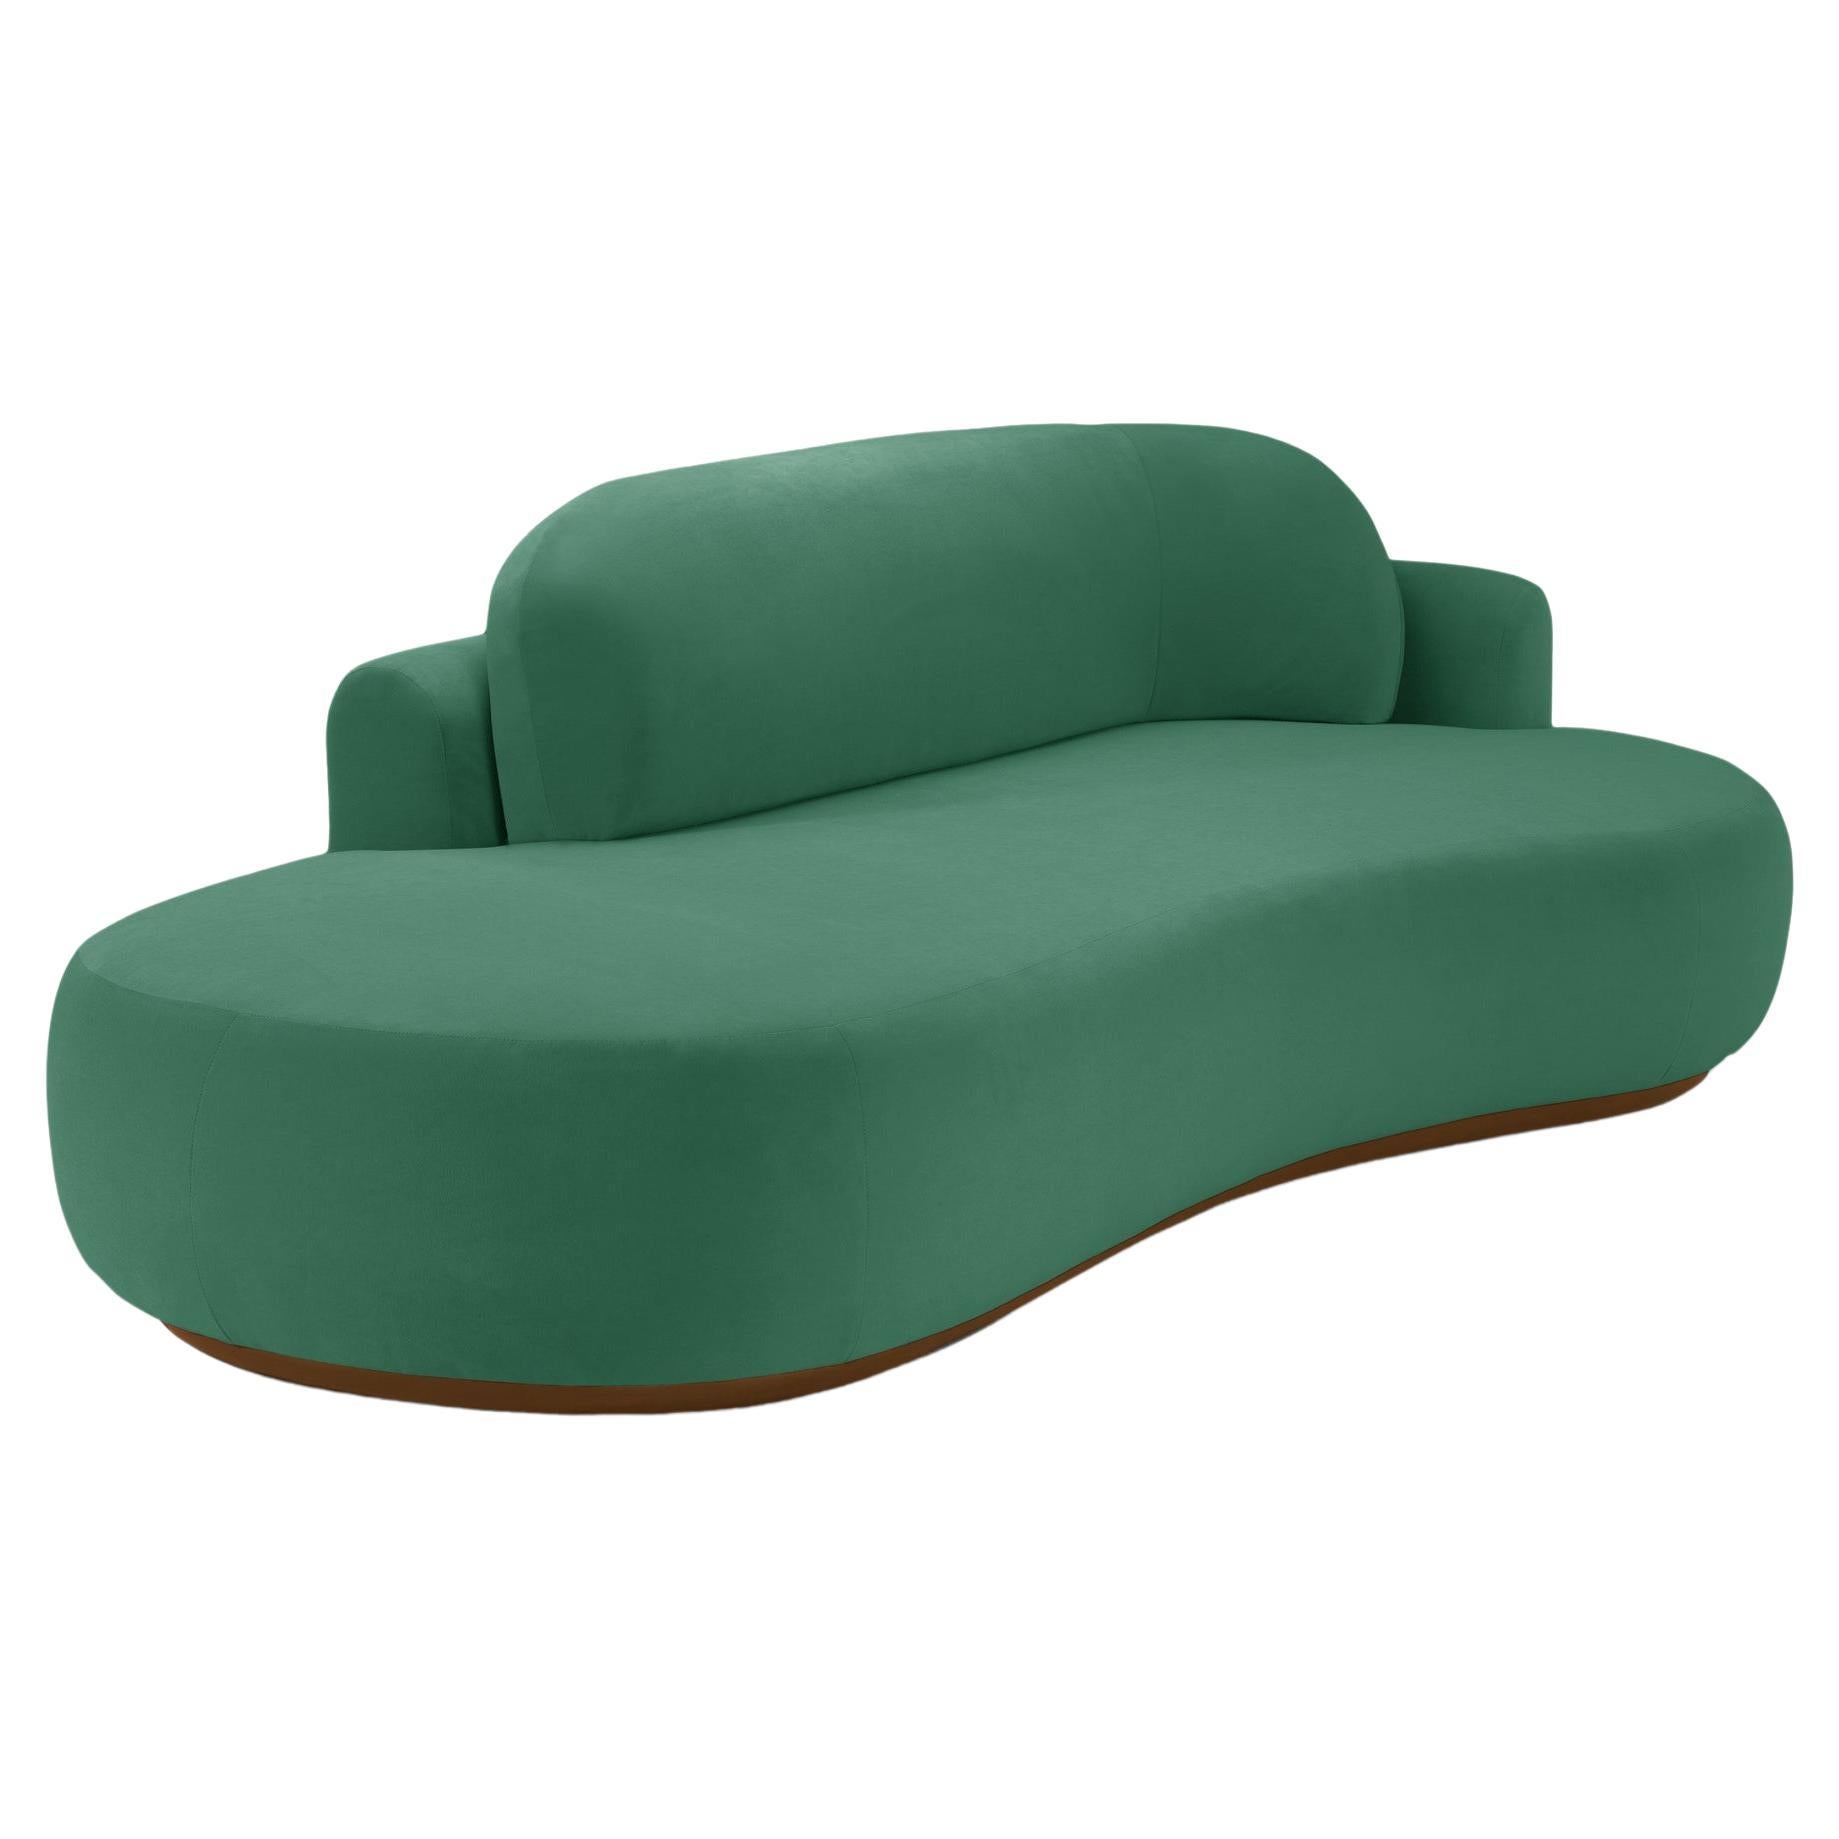 Naked Curved Sofa Single with Beech Ash-056-1 and Paris Green For Sale